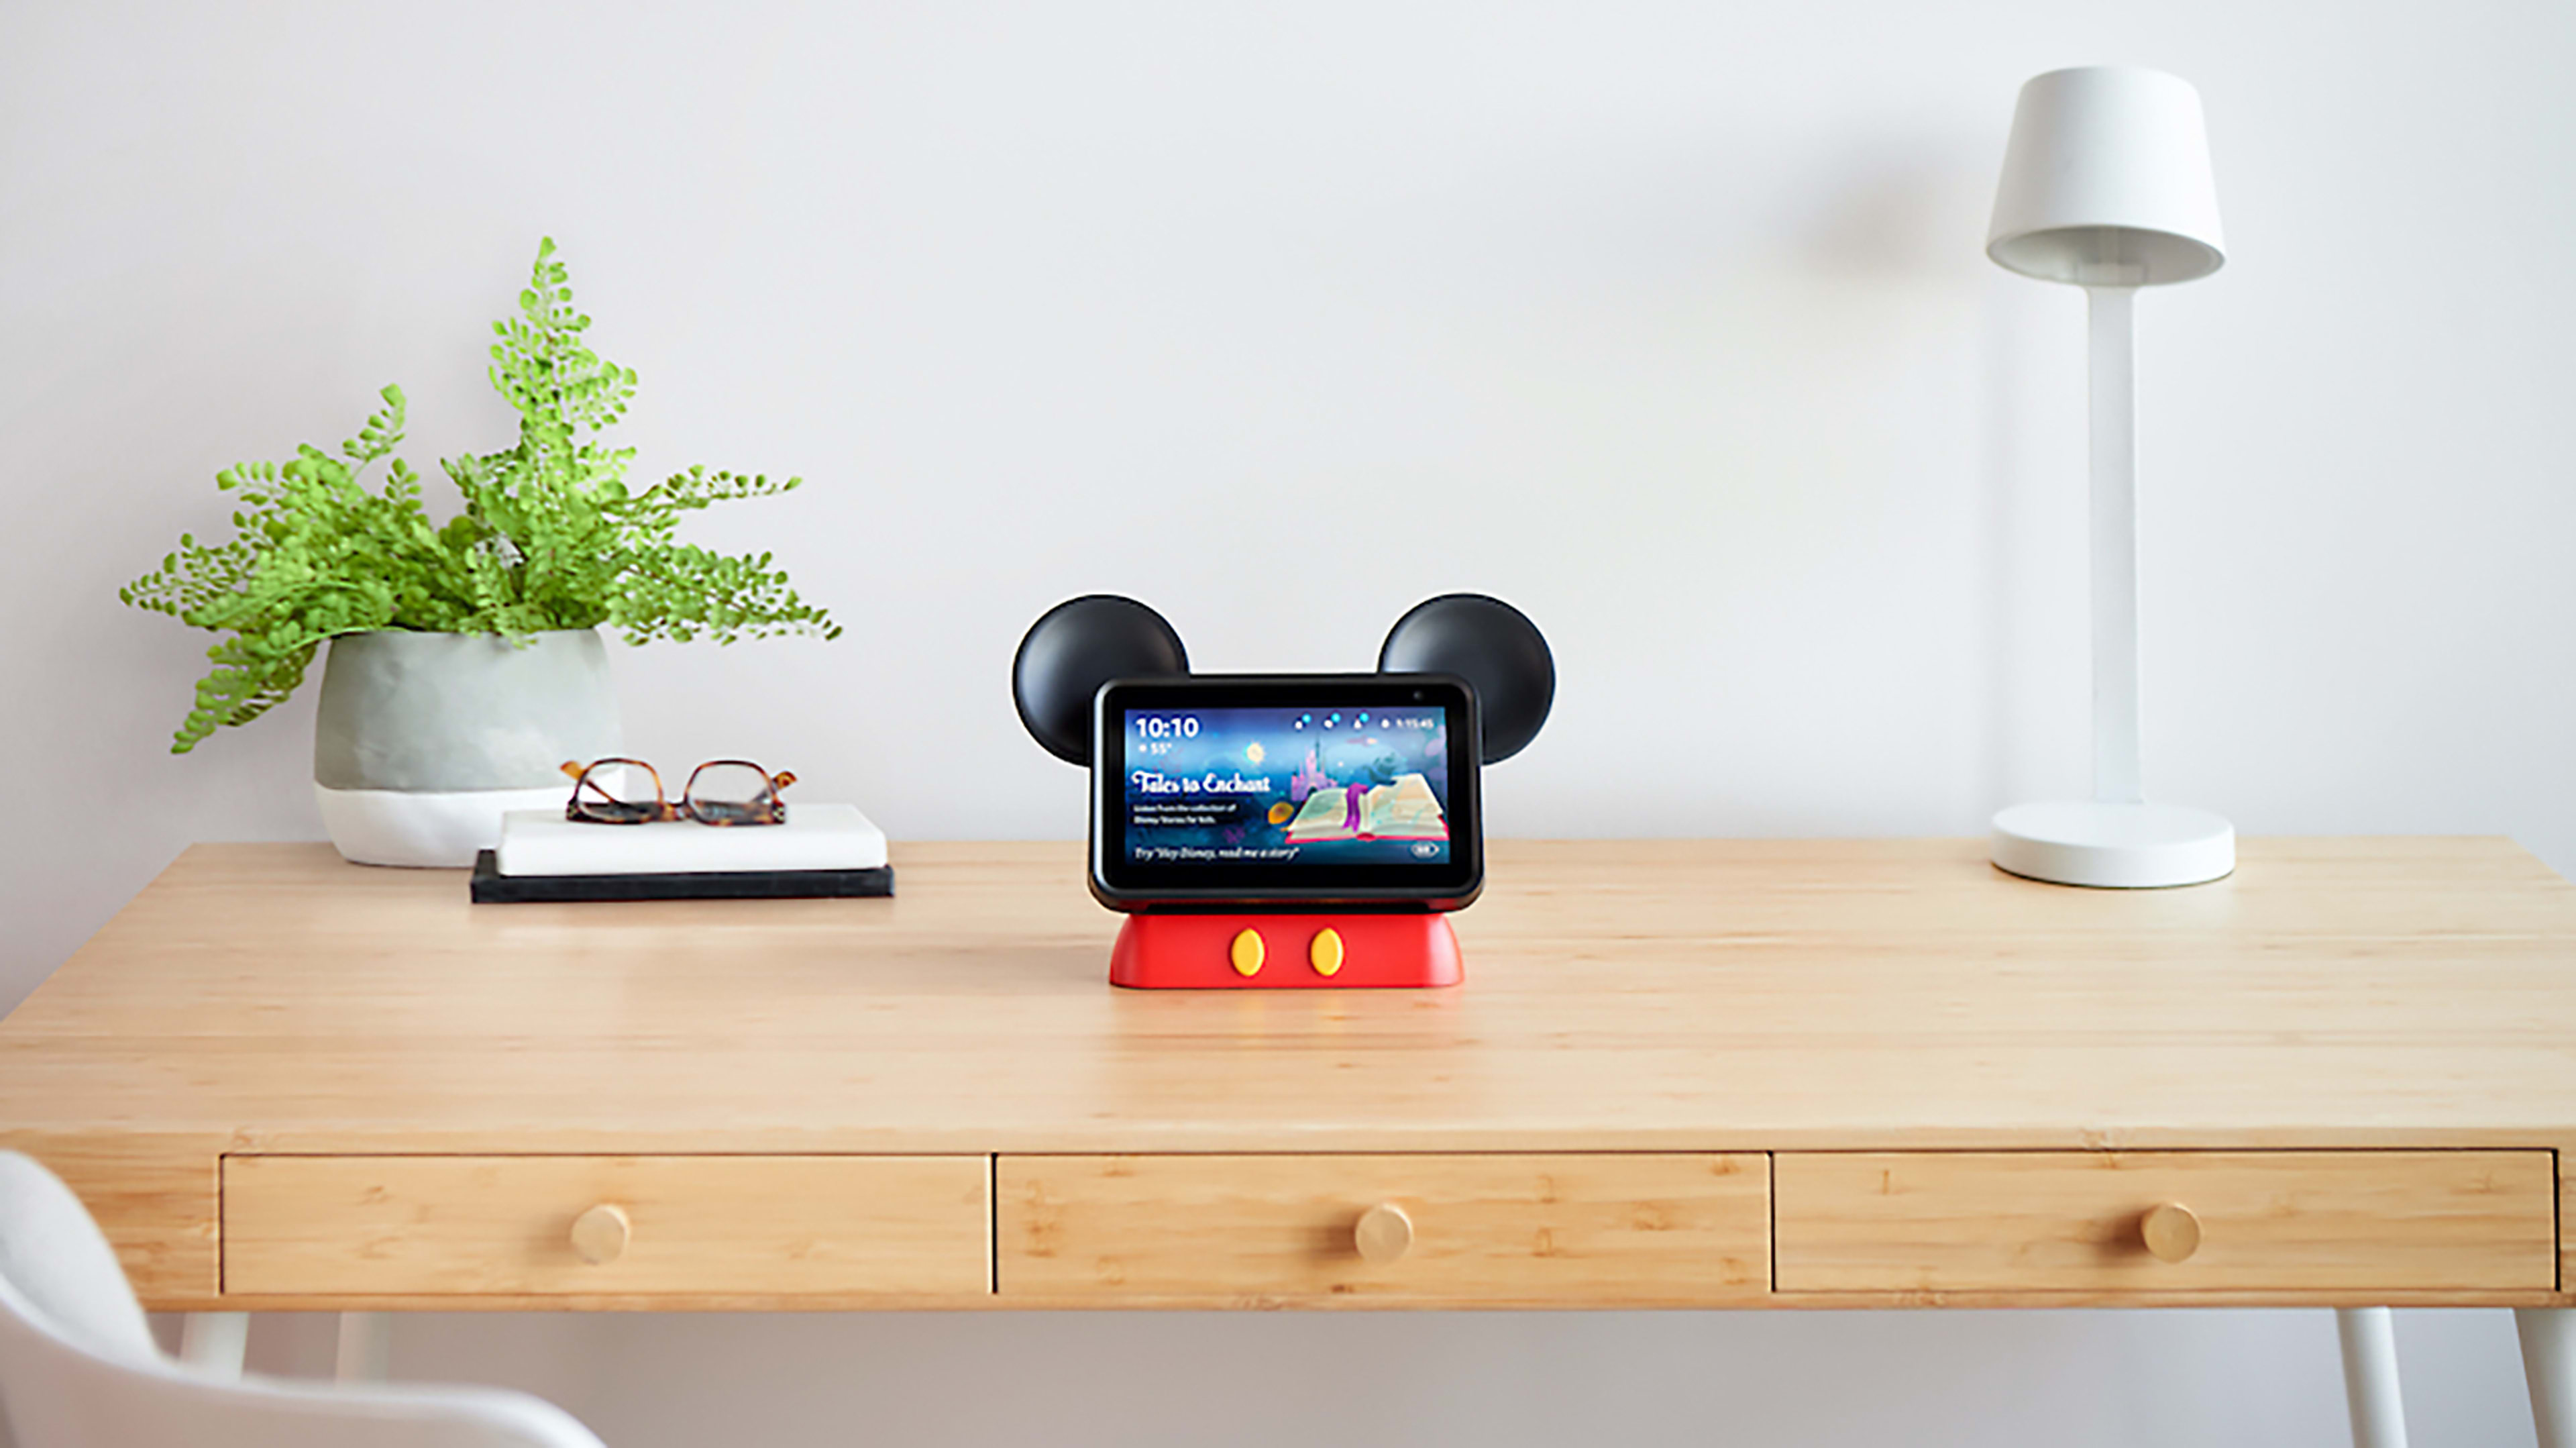 ‘Hey, Disney!’ Amazon rolls out new voice assistant for Orlando resorts and Echo devices